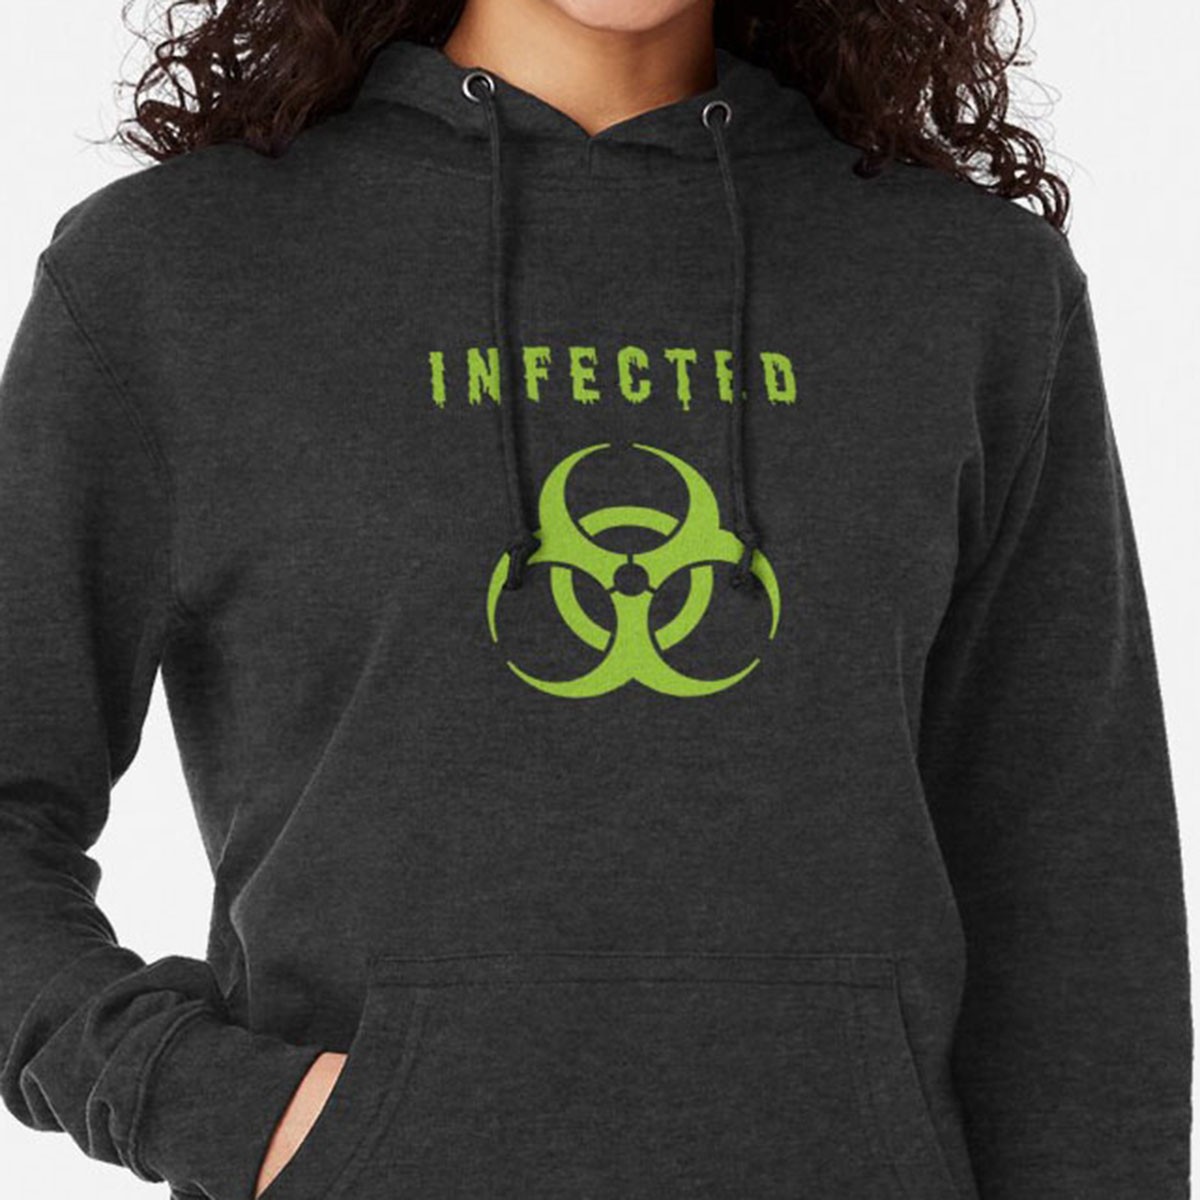 Infected - Let the world know to keep their distance -  Lightweight Hoodie by NTK Apparel